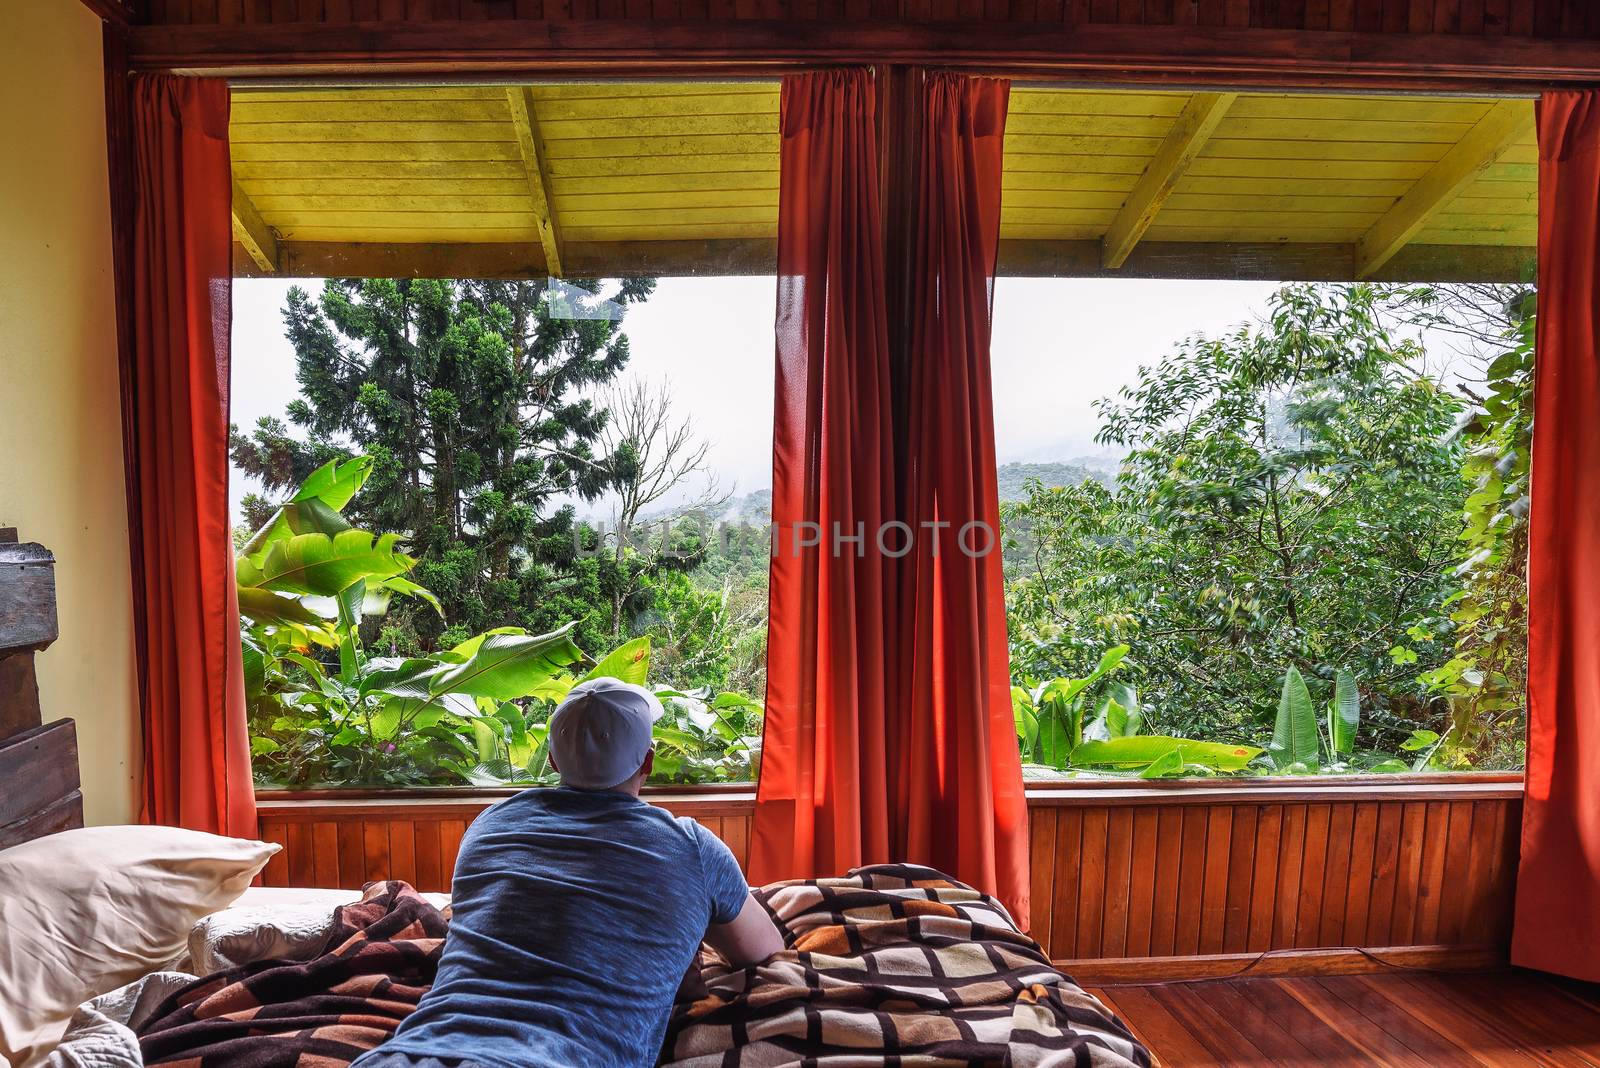 Vara Blanca, Costa Rica - January 13, 2020 : Tourist lying on a bed in Volcan Poas Tiquicia Lodge, a three-star lodge featuring bungalows with volcano views and located close to La Paz Waterfall.